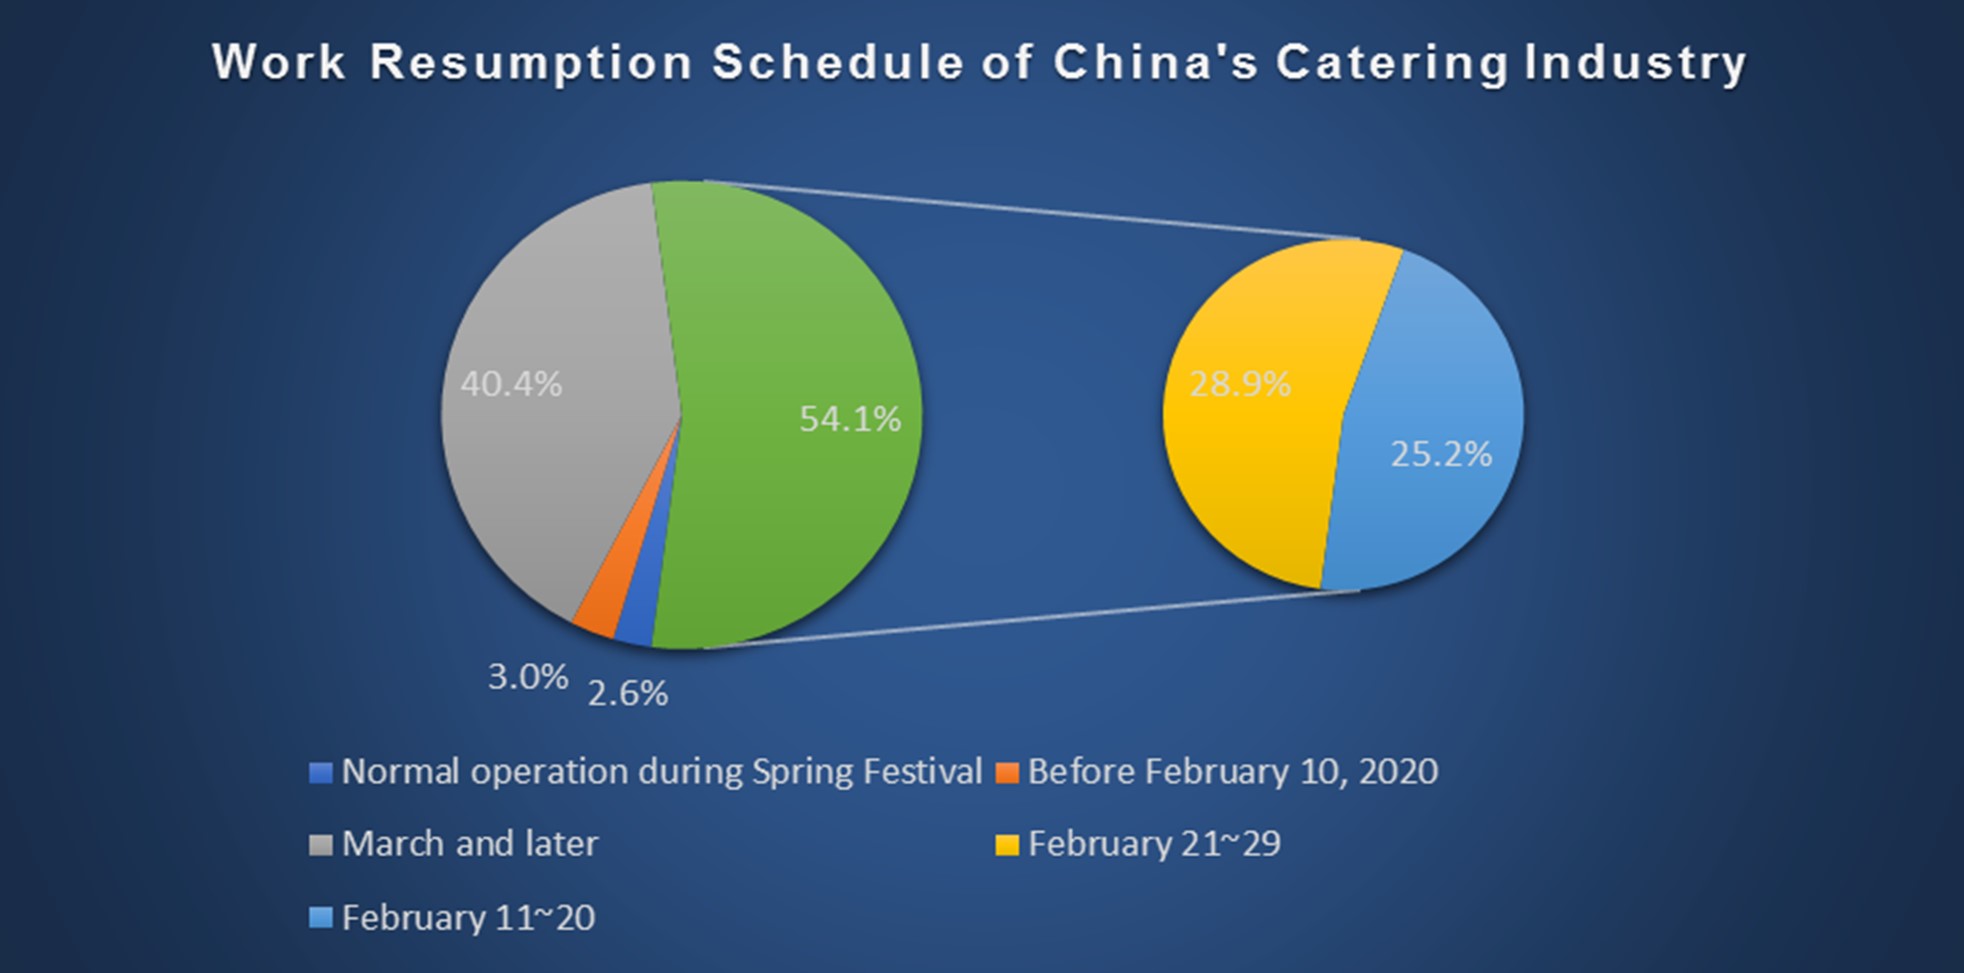 Work resumption schedule of China's catering industry